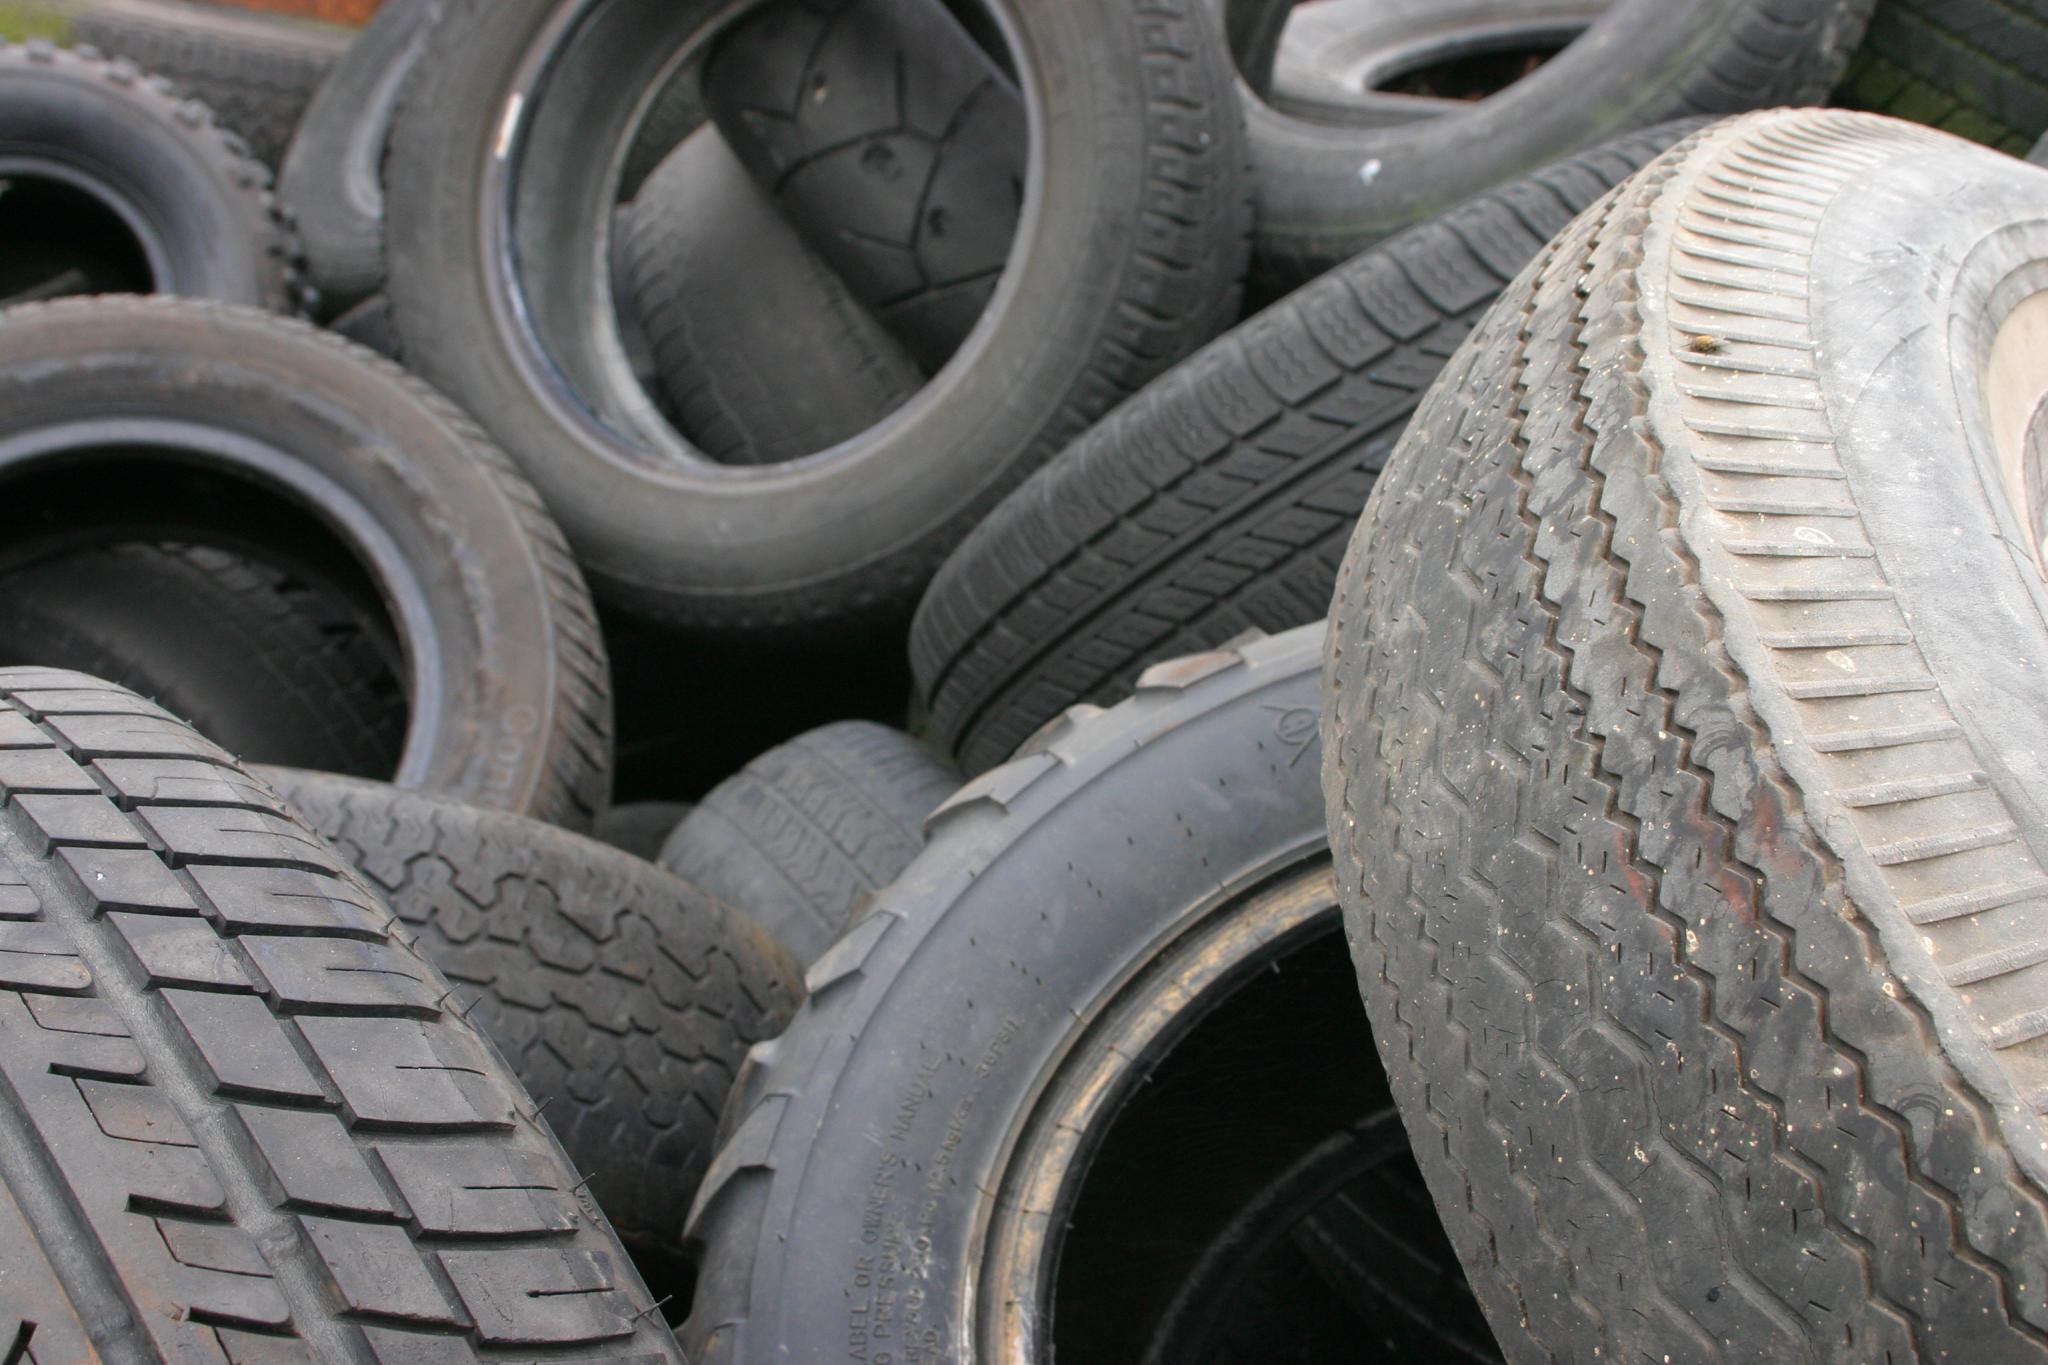 Old minibus and bus tyres banned